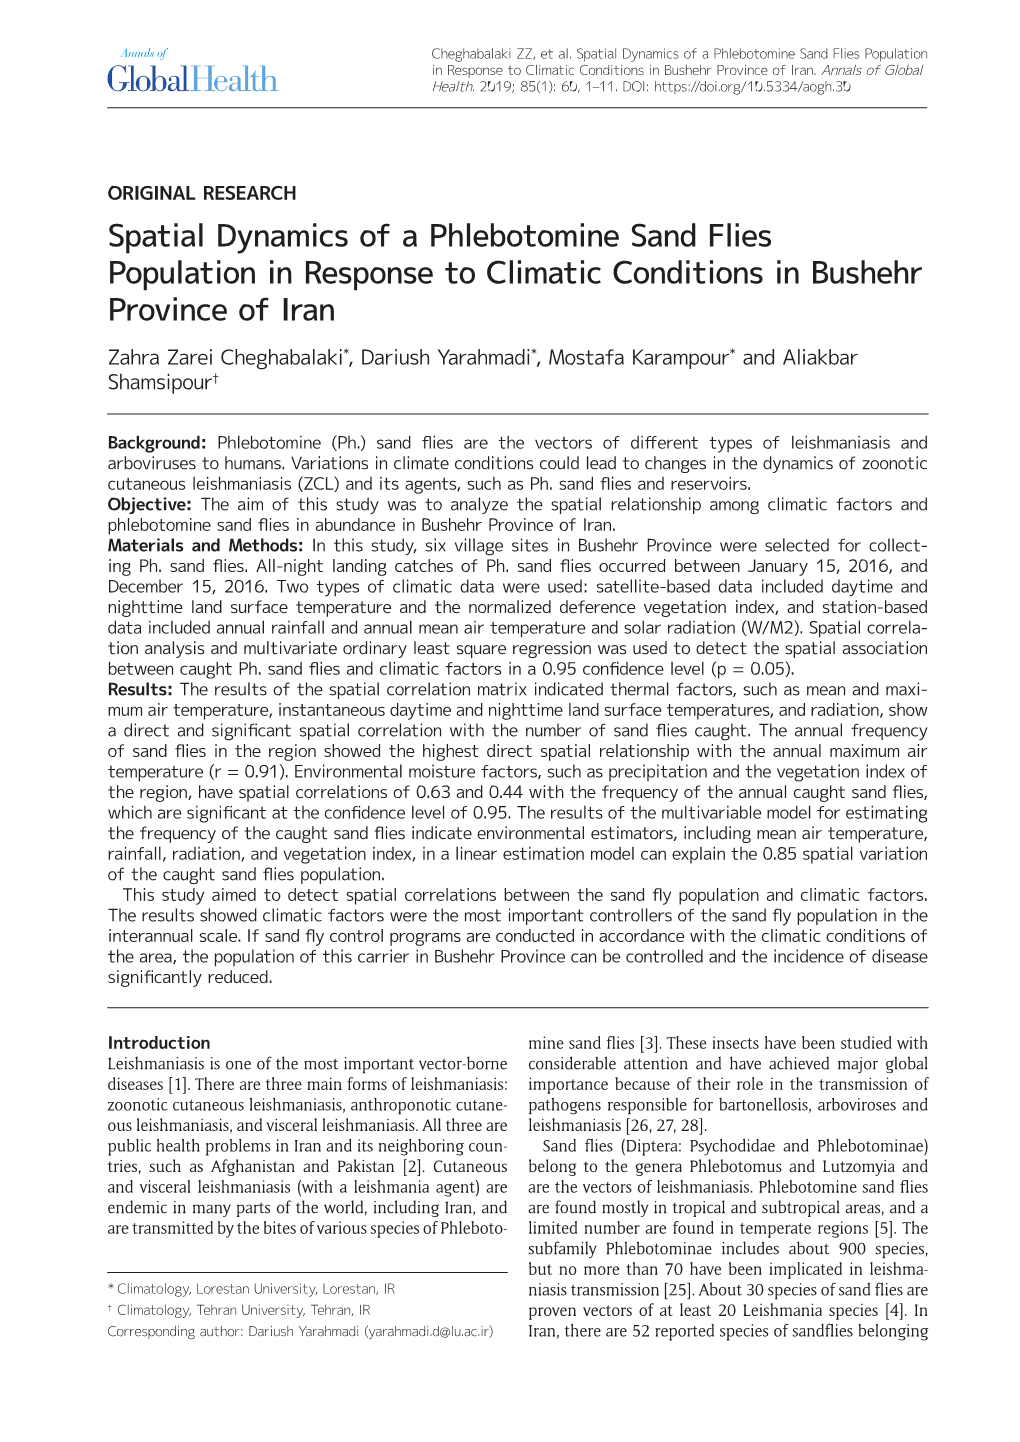 Spatial Dynamics of a Phlebotomine Sand Flies Population in Response to Climatic Conditions in Bushehr Province of Iran